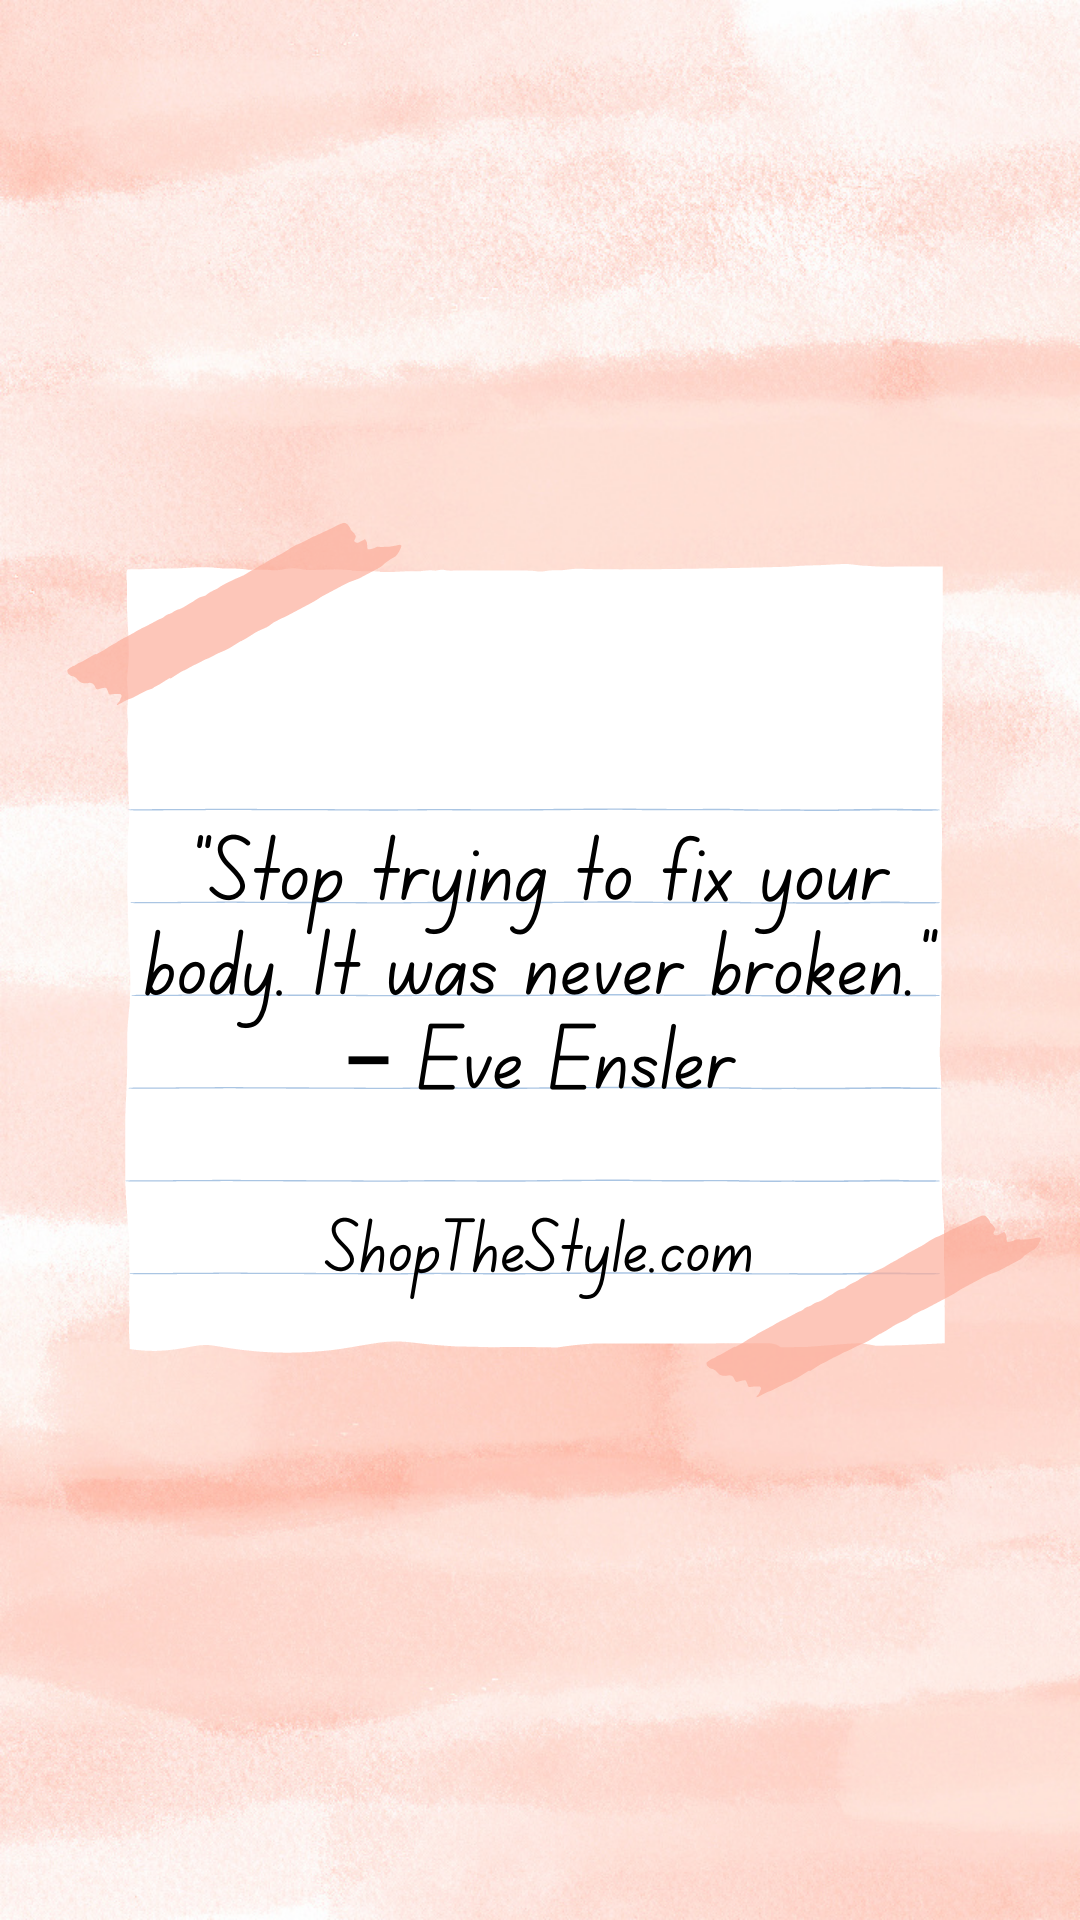 Stop trying to fix your body. It was never broken.